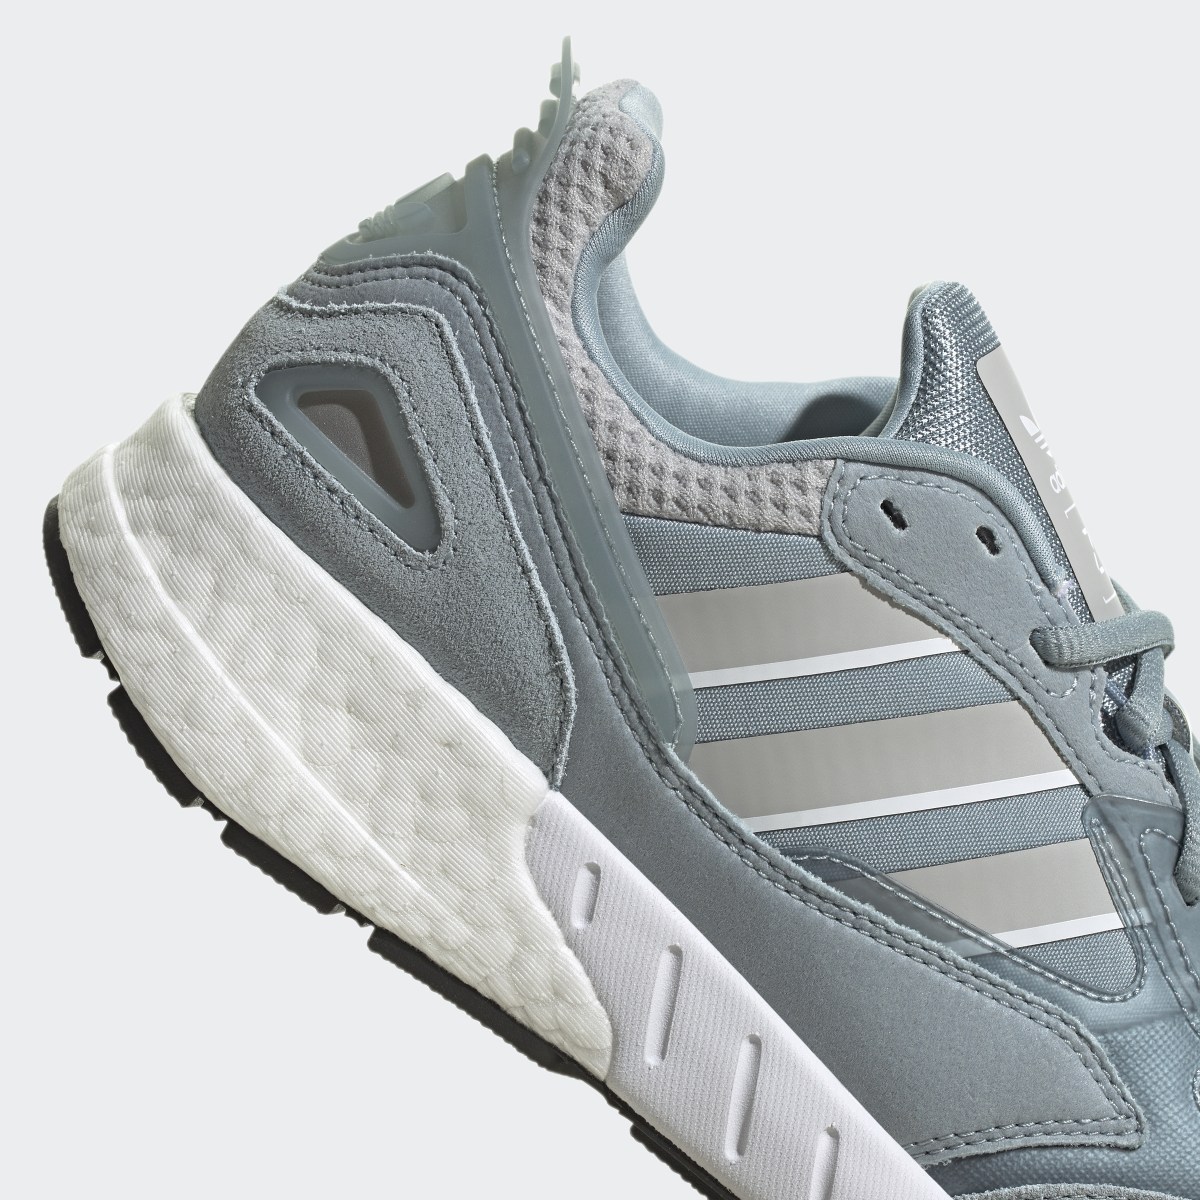 Adidas ZX 1K BOOST 2.0 Shoes. 8